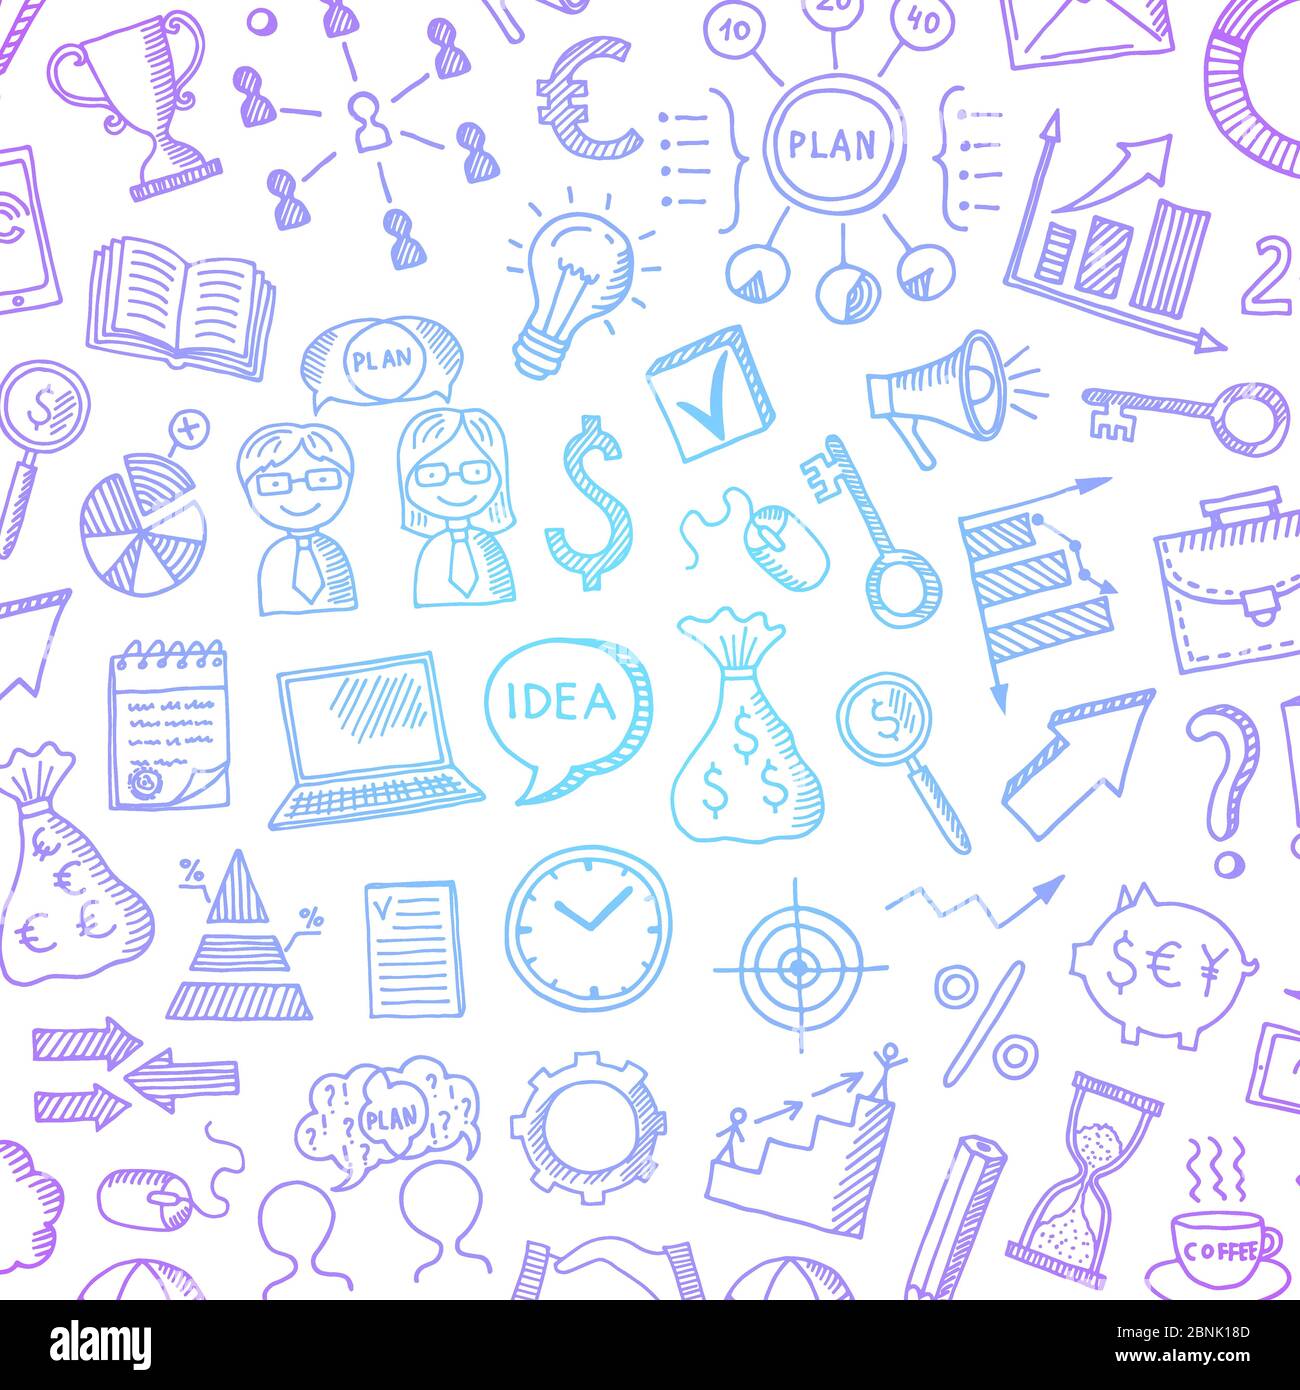 Vector business doodle icons background with place for text illustration Stock Vector